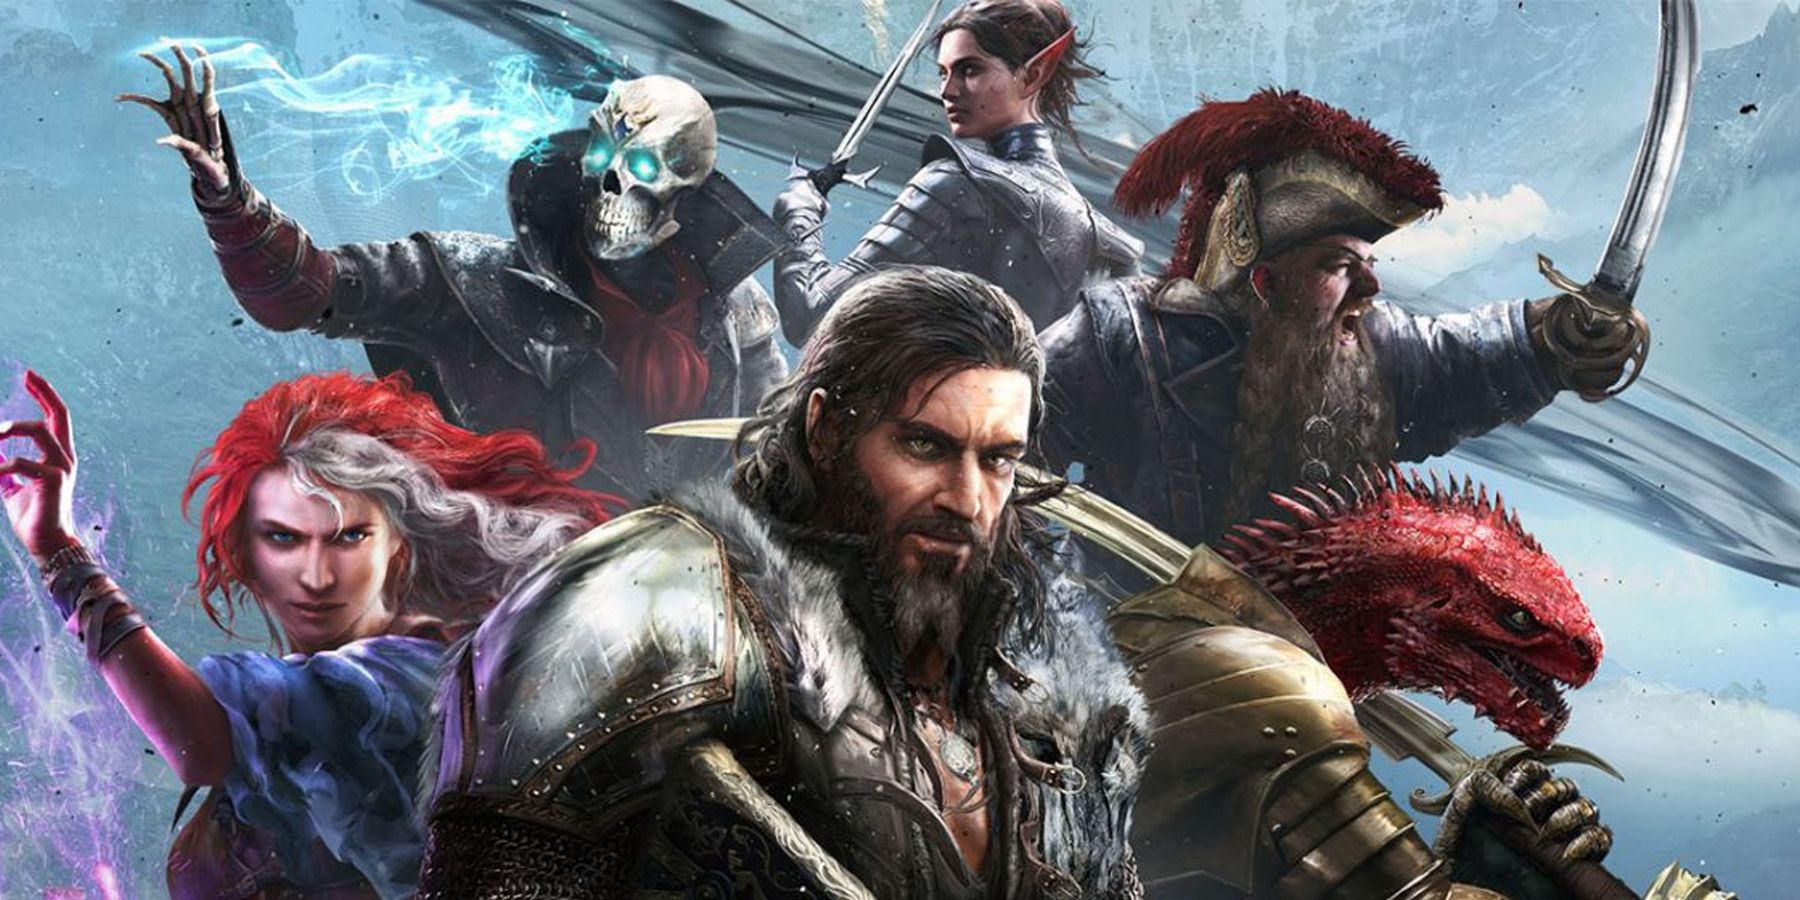 Combat-Ready Characters in Divinity Original Sin 2